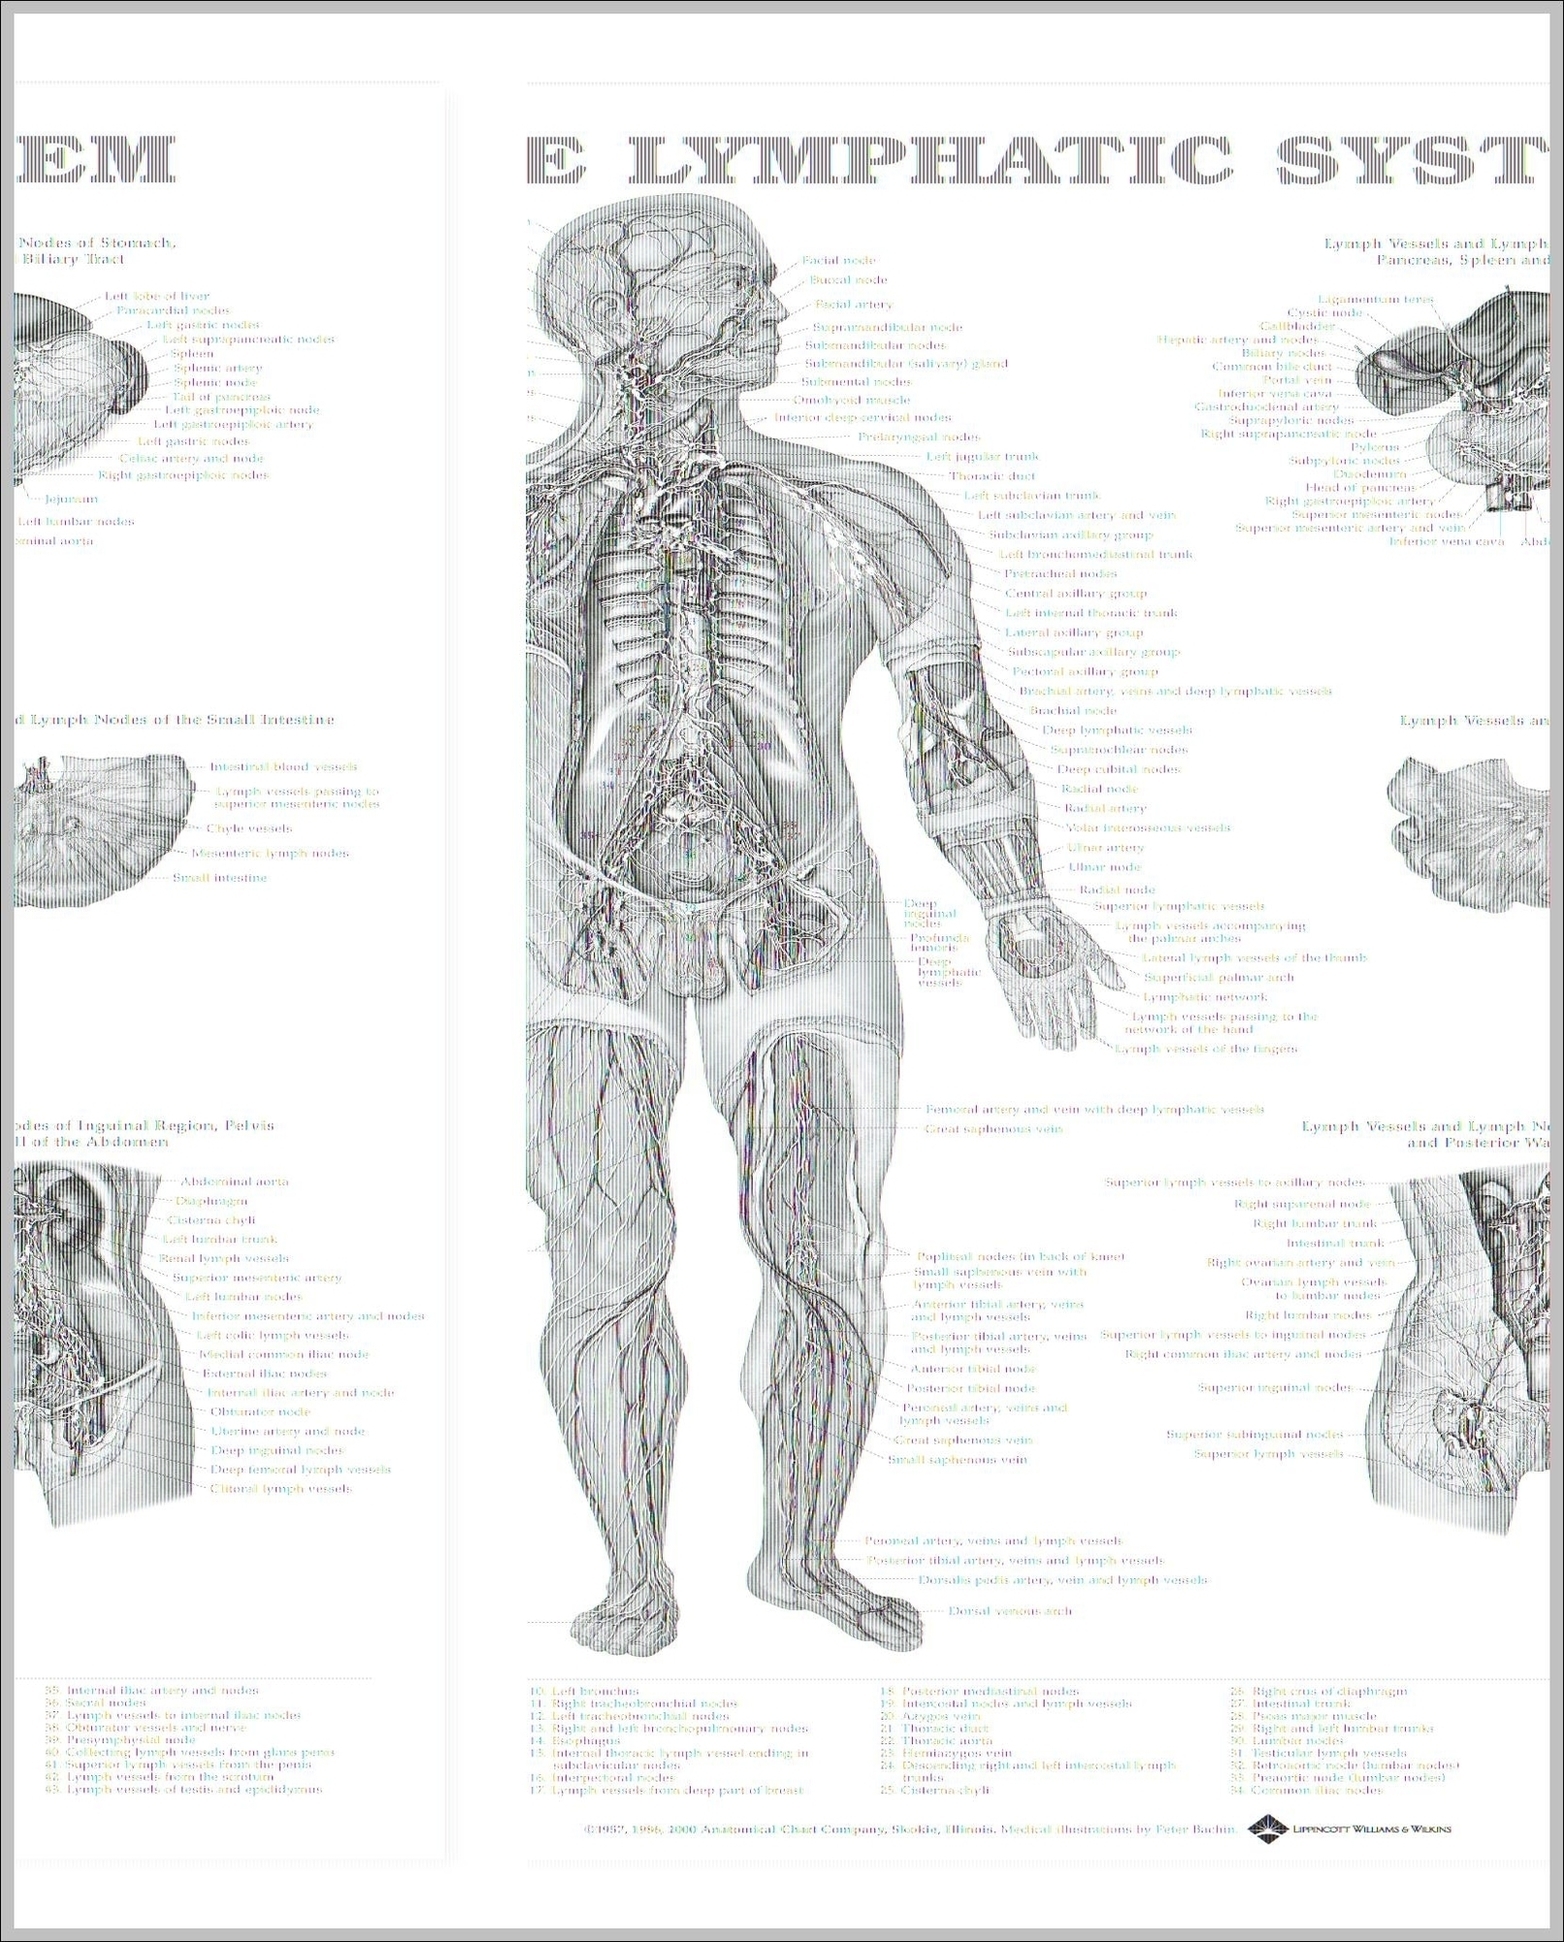 Lymphatic System Image